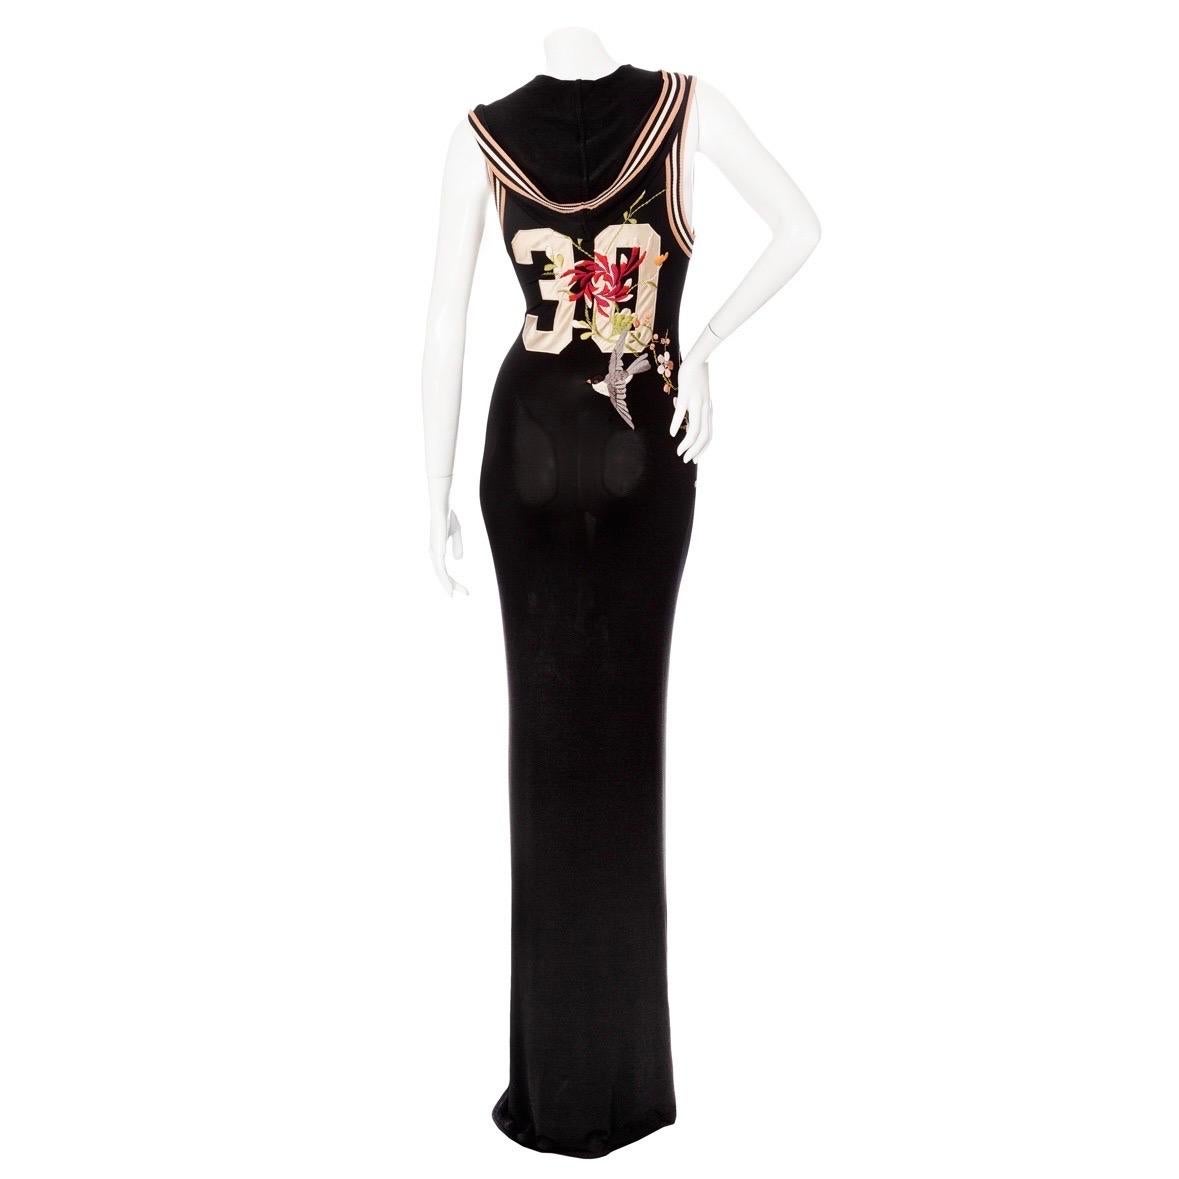 Jean Paul Gaultier 2007 Black Embroidered Hooded Jersey Maxi Dress 

Spring 2007 Ready-to-Wear Collection
Black
Embroidery featuring Japanese-inspired florals and sparrow
Jersey style appliqué number 